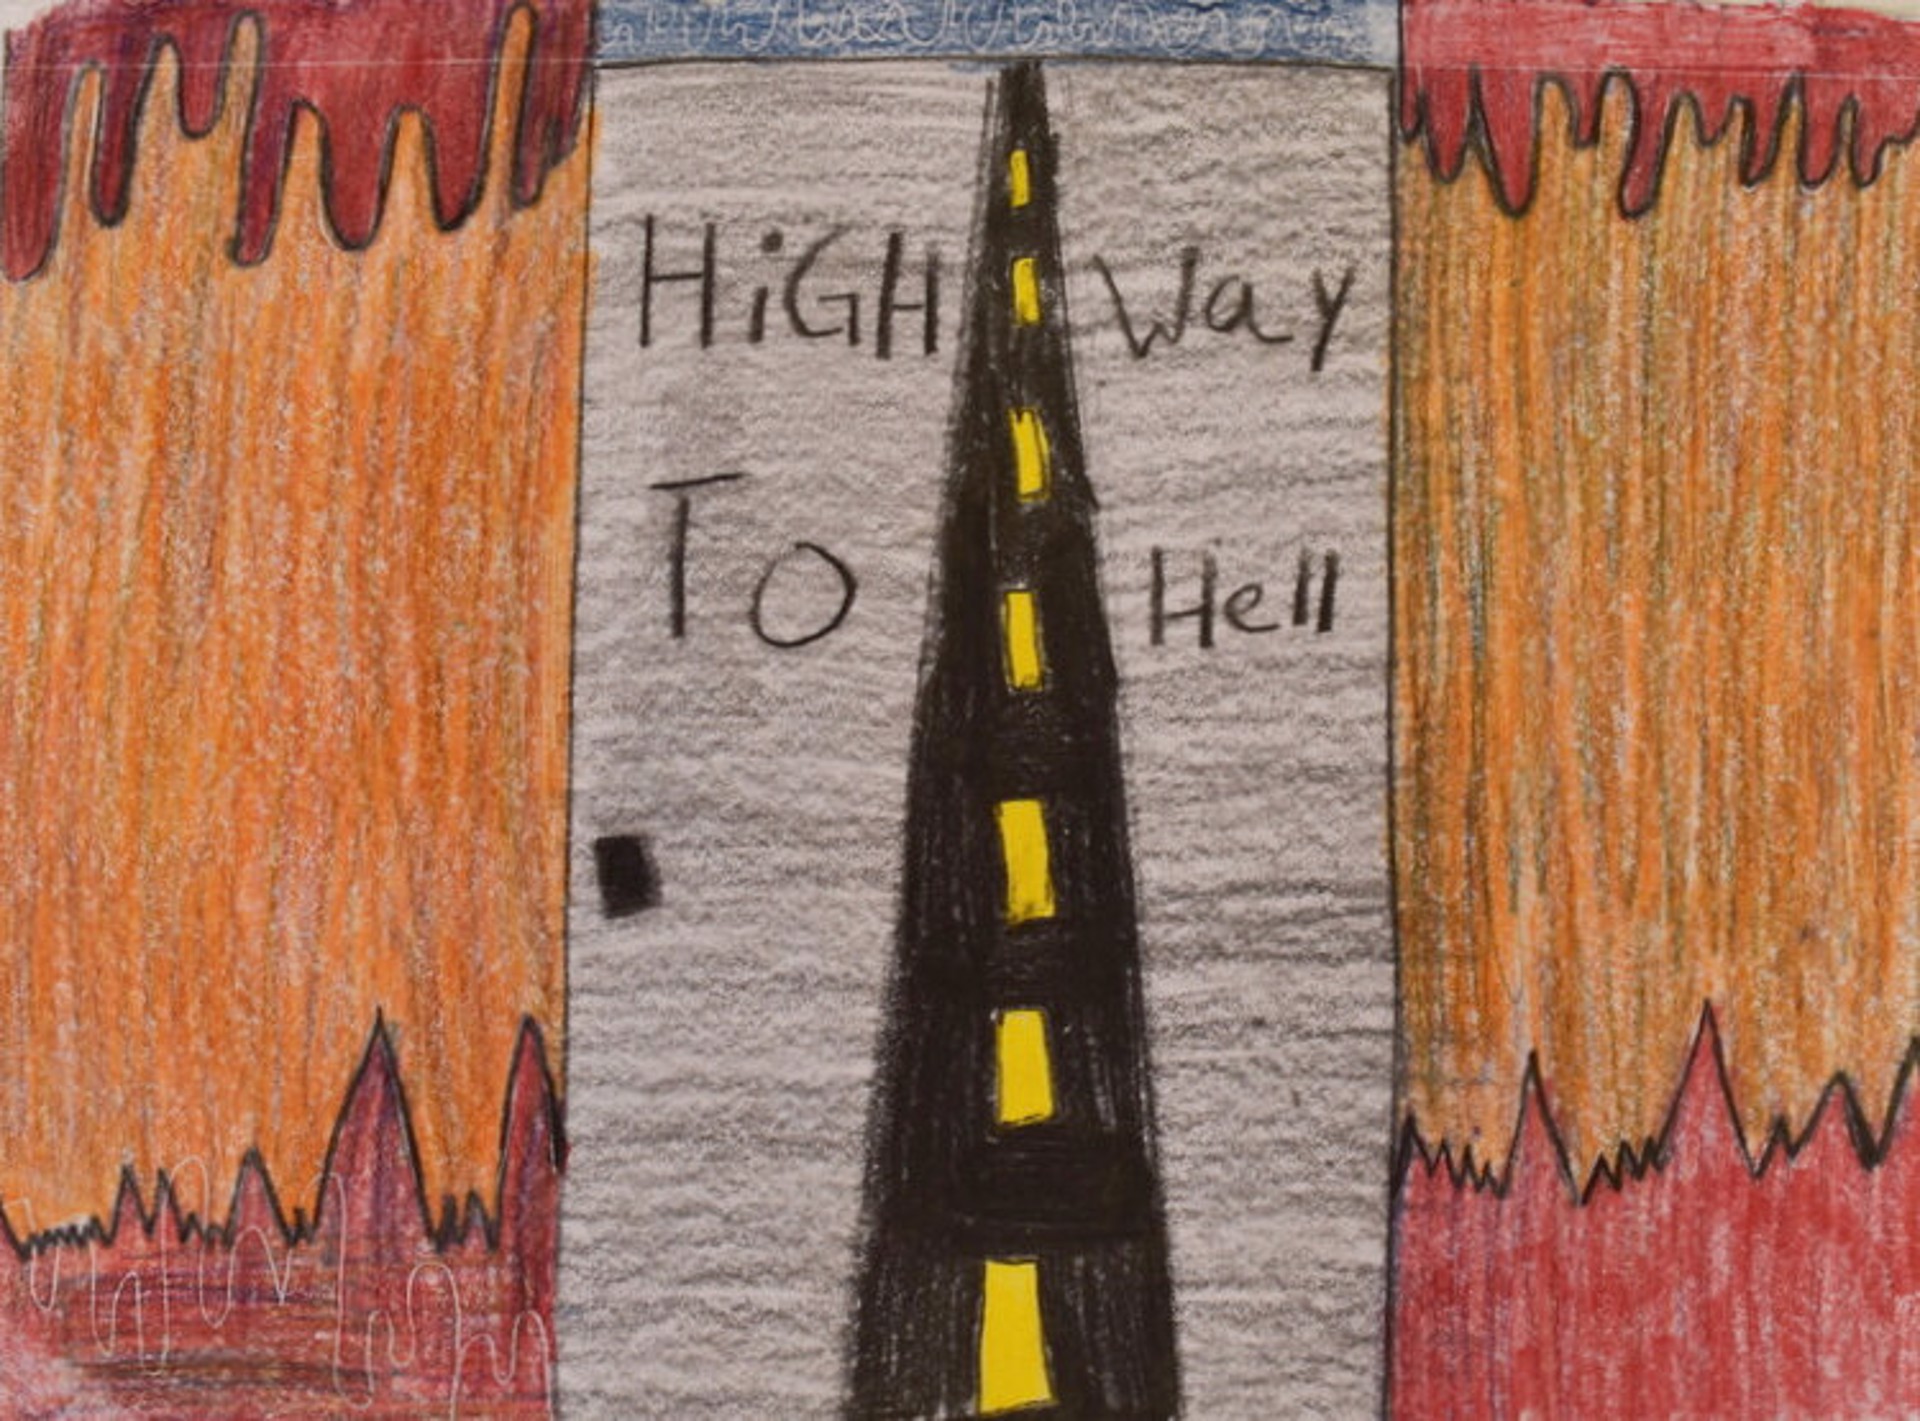 High Way to Hell by Highway to Hell